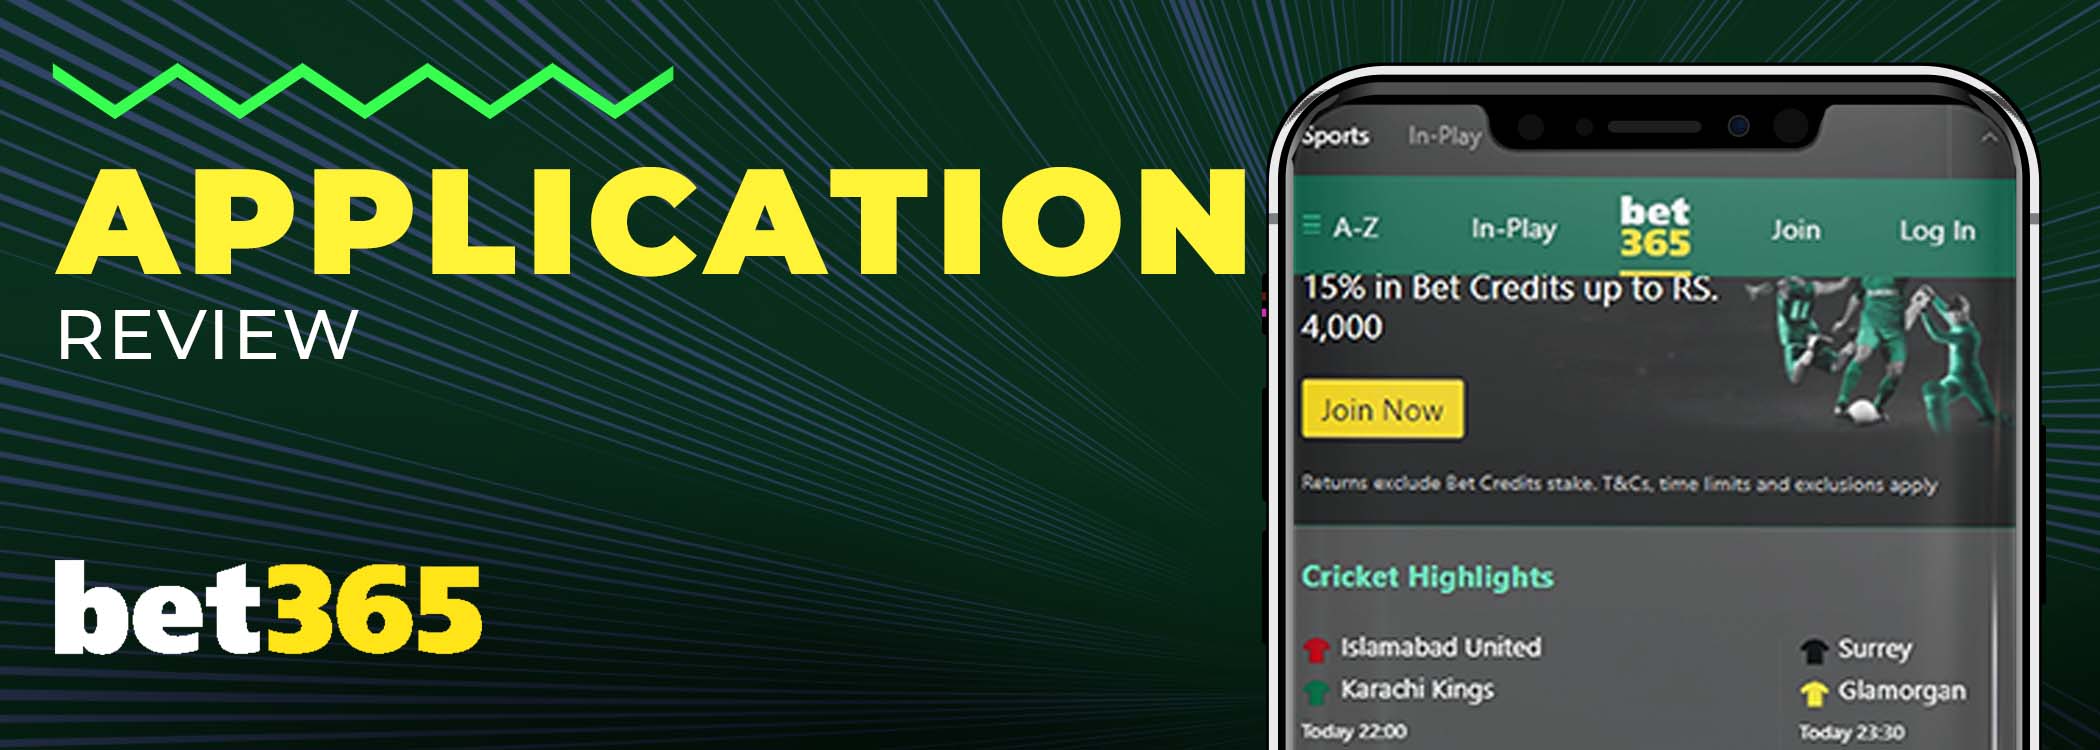 Bet365 application review.